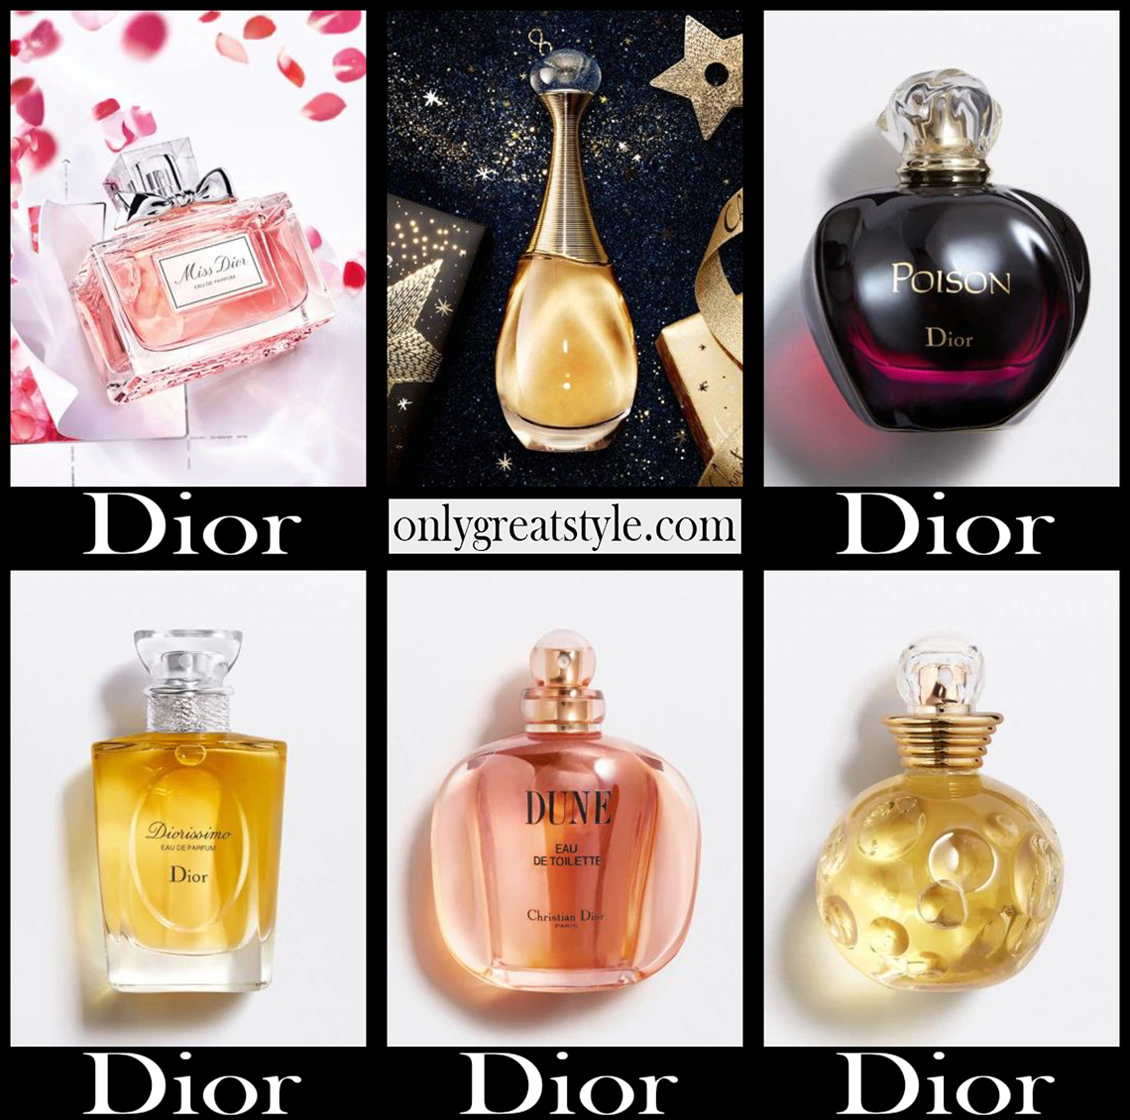 Dior perfumes 2021 new arrivals gift ideas for women